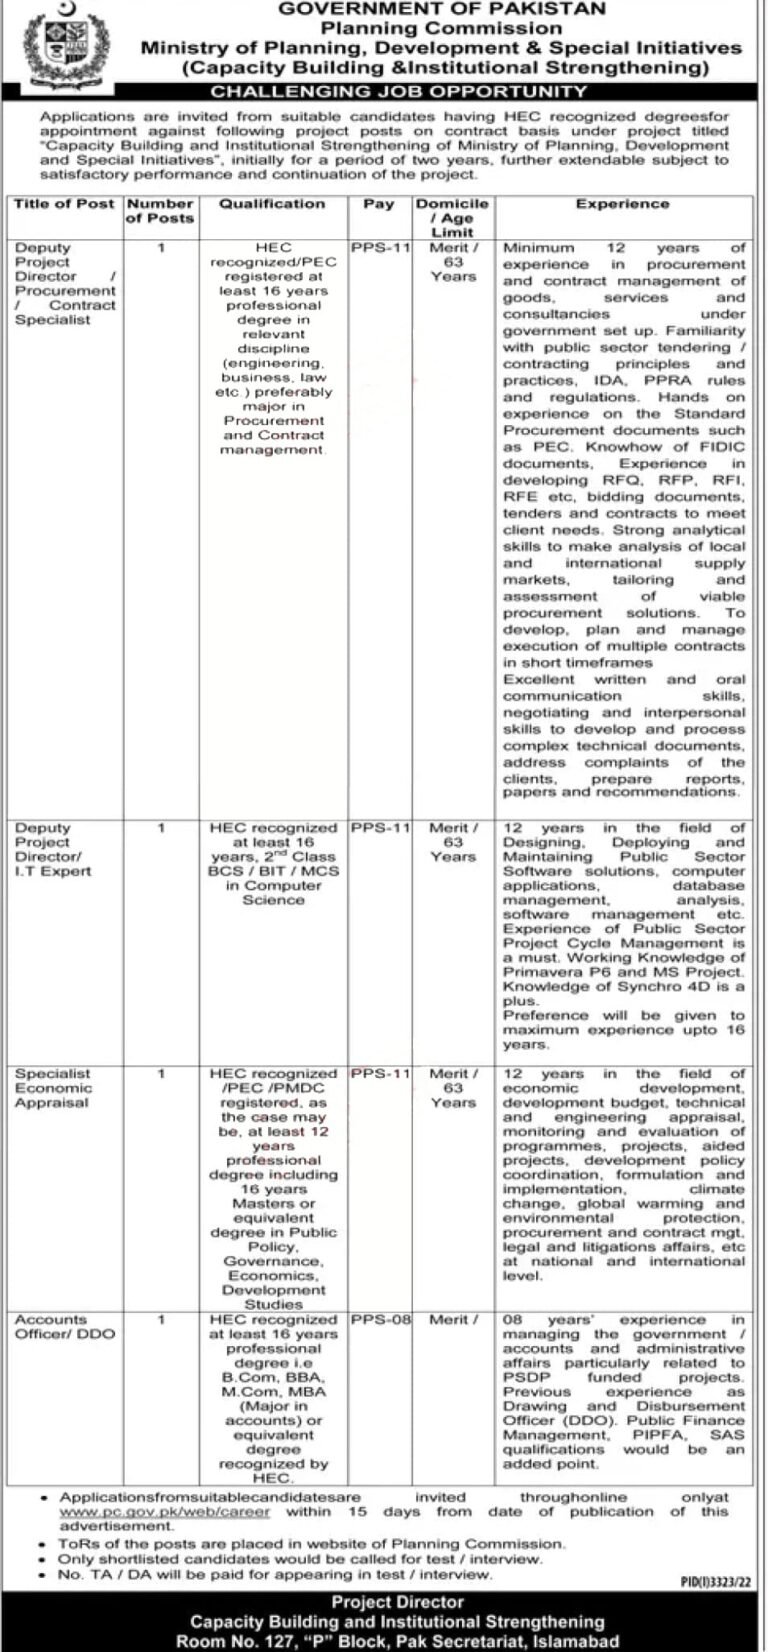 Ministry of Planning and Development Jobs 2022 in Planning Commission